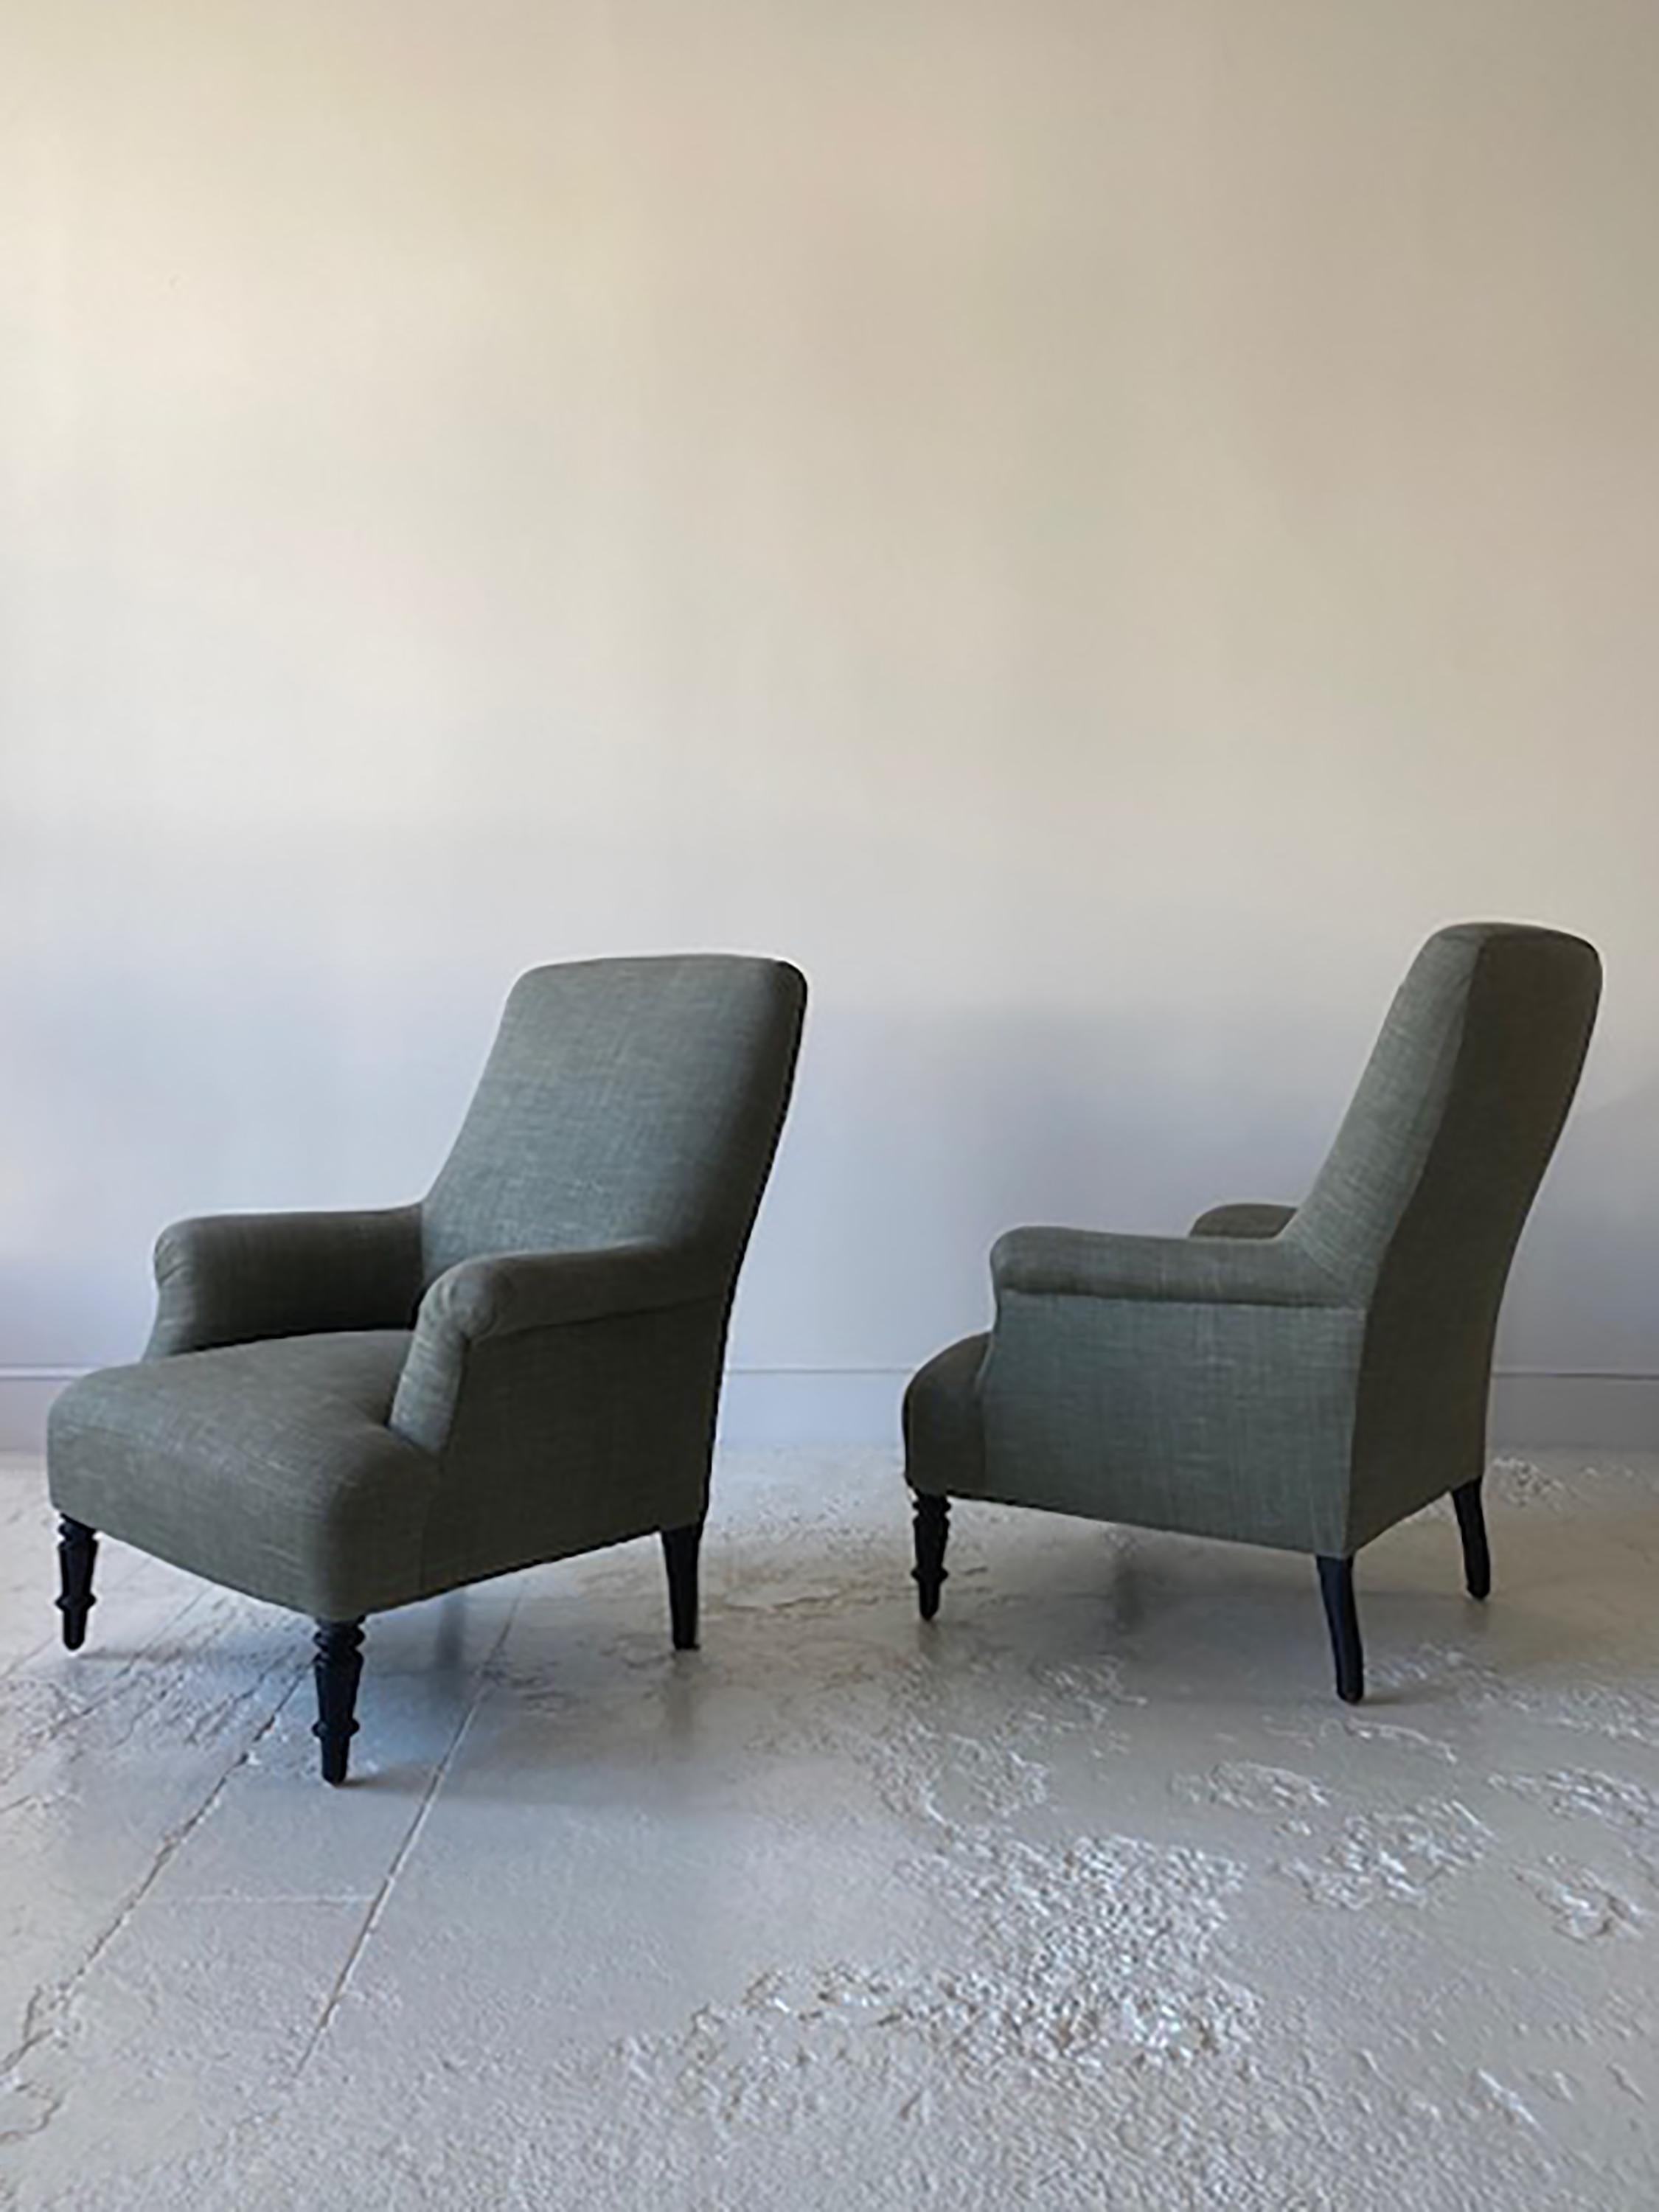 Pair of classic French high back club chairs with rolled arms, newly upholstered in a faded green linen fabric. Original leg finish intact to keep an aged patina presence to the chairs.